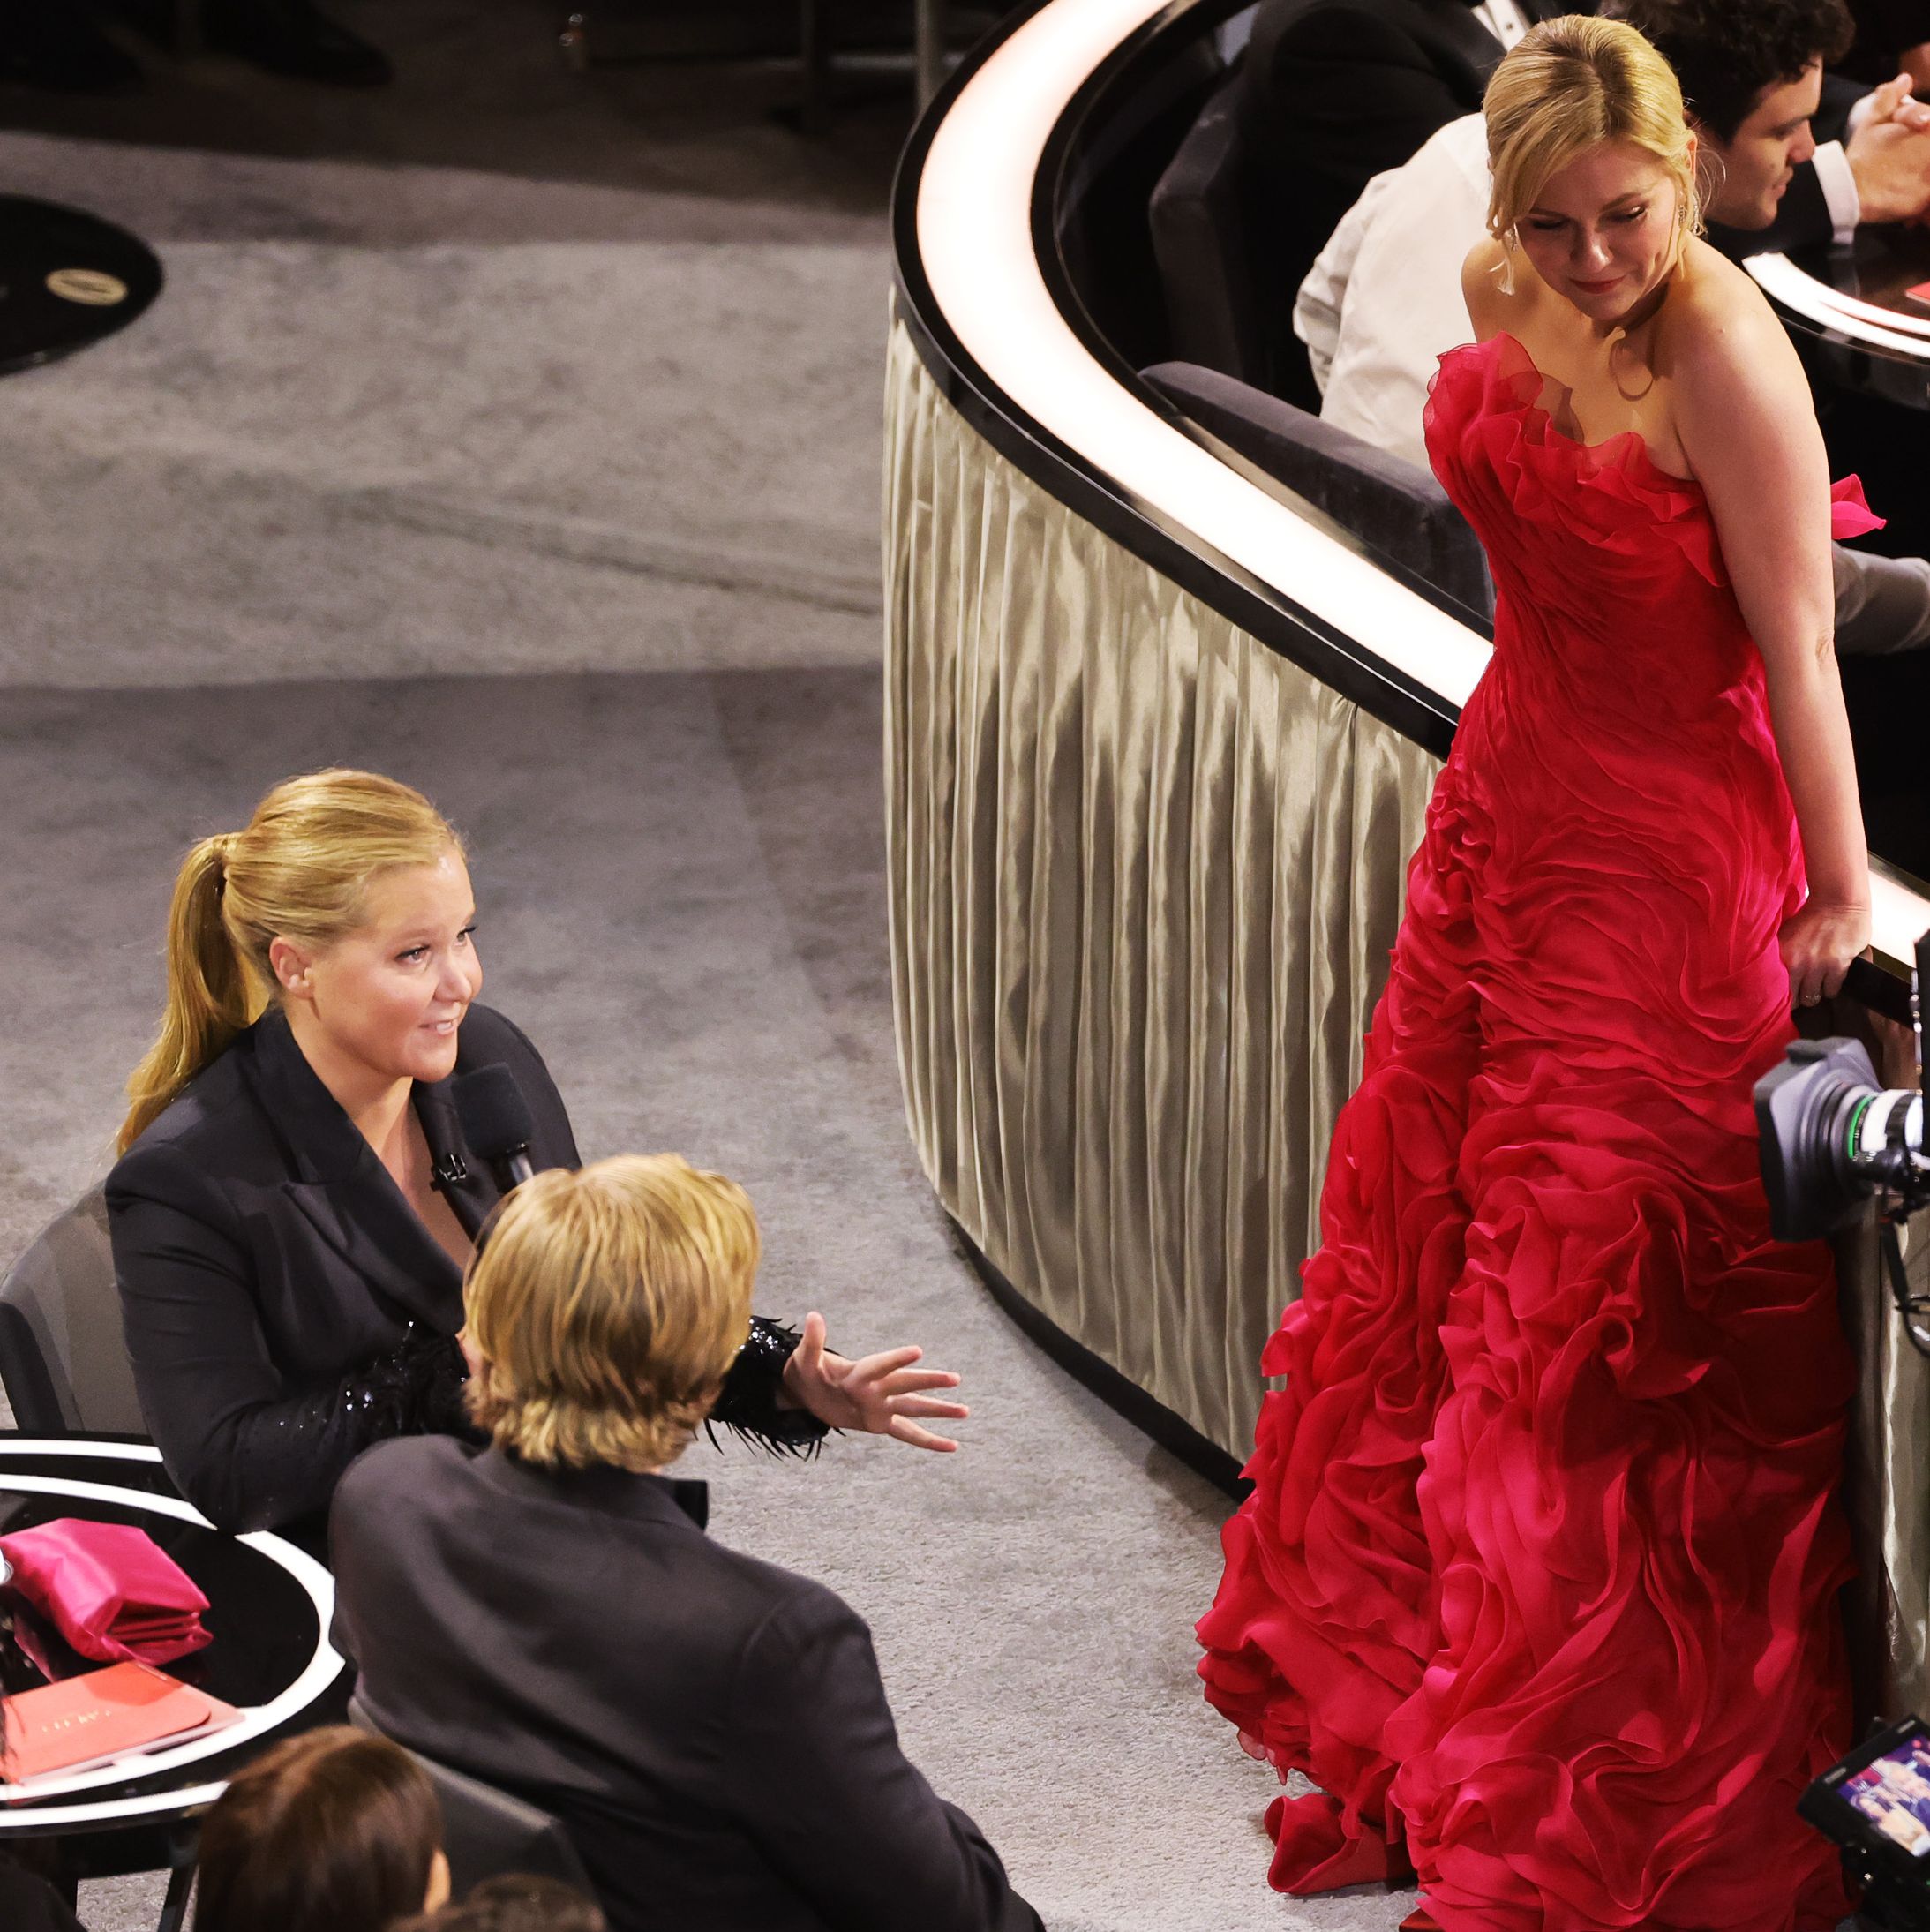 Amy Schumer Addresses Claim She Disrespected Kirsten Dunst at the Oscars